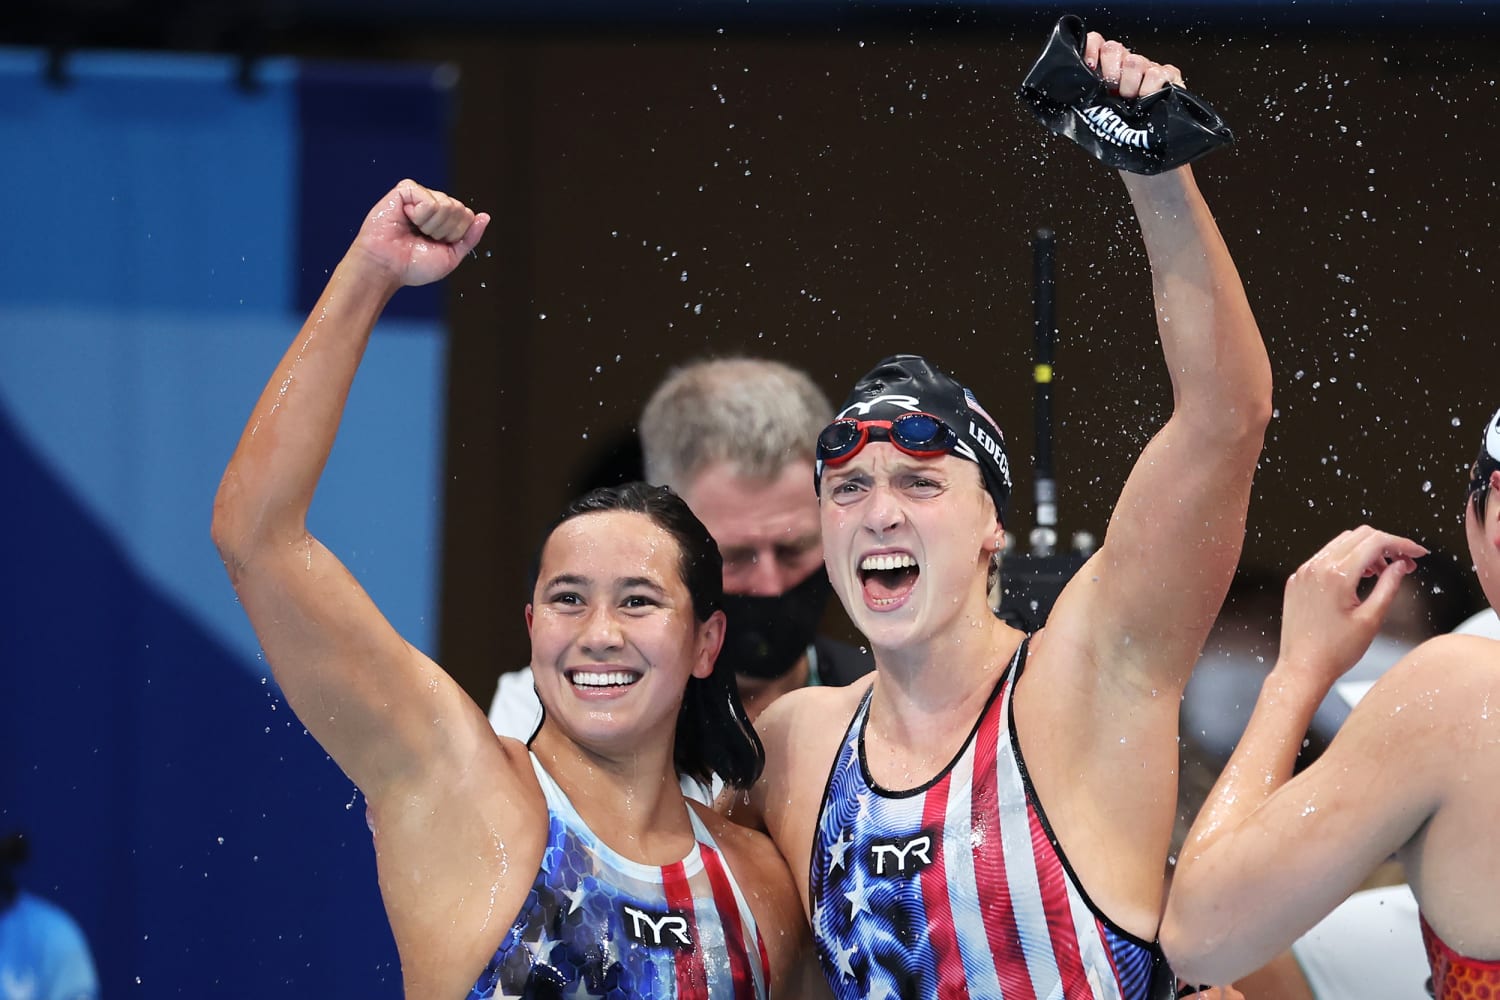 Katie Ledecky claims gold in Olympic debut of 1500-meter race